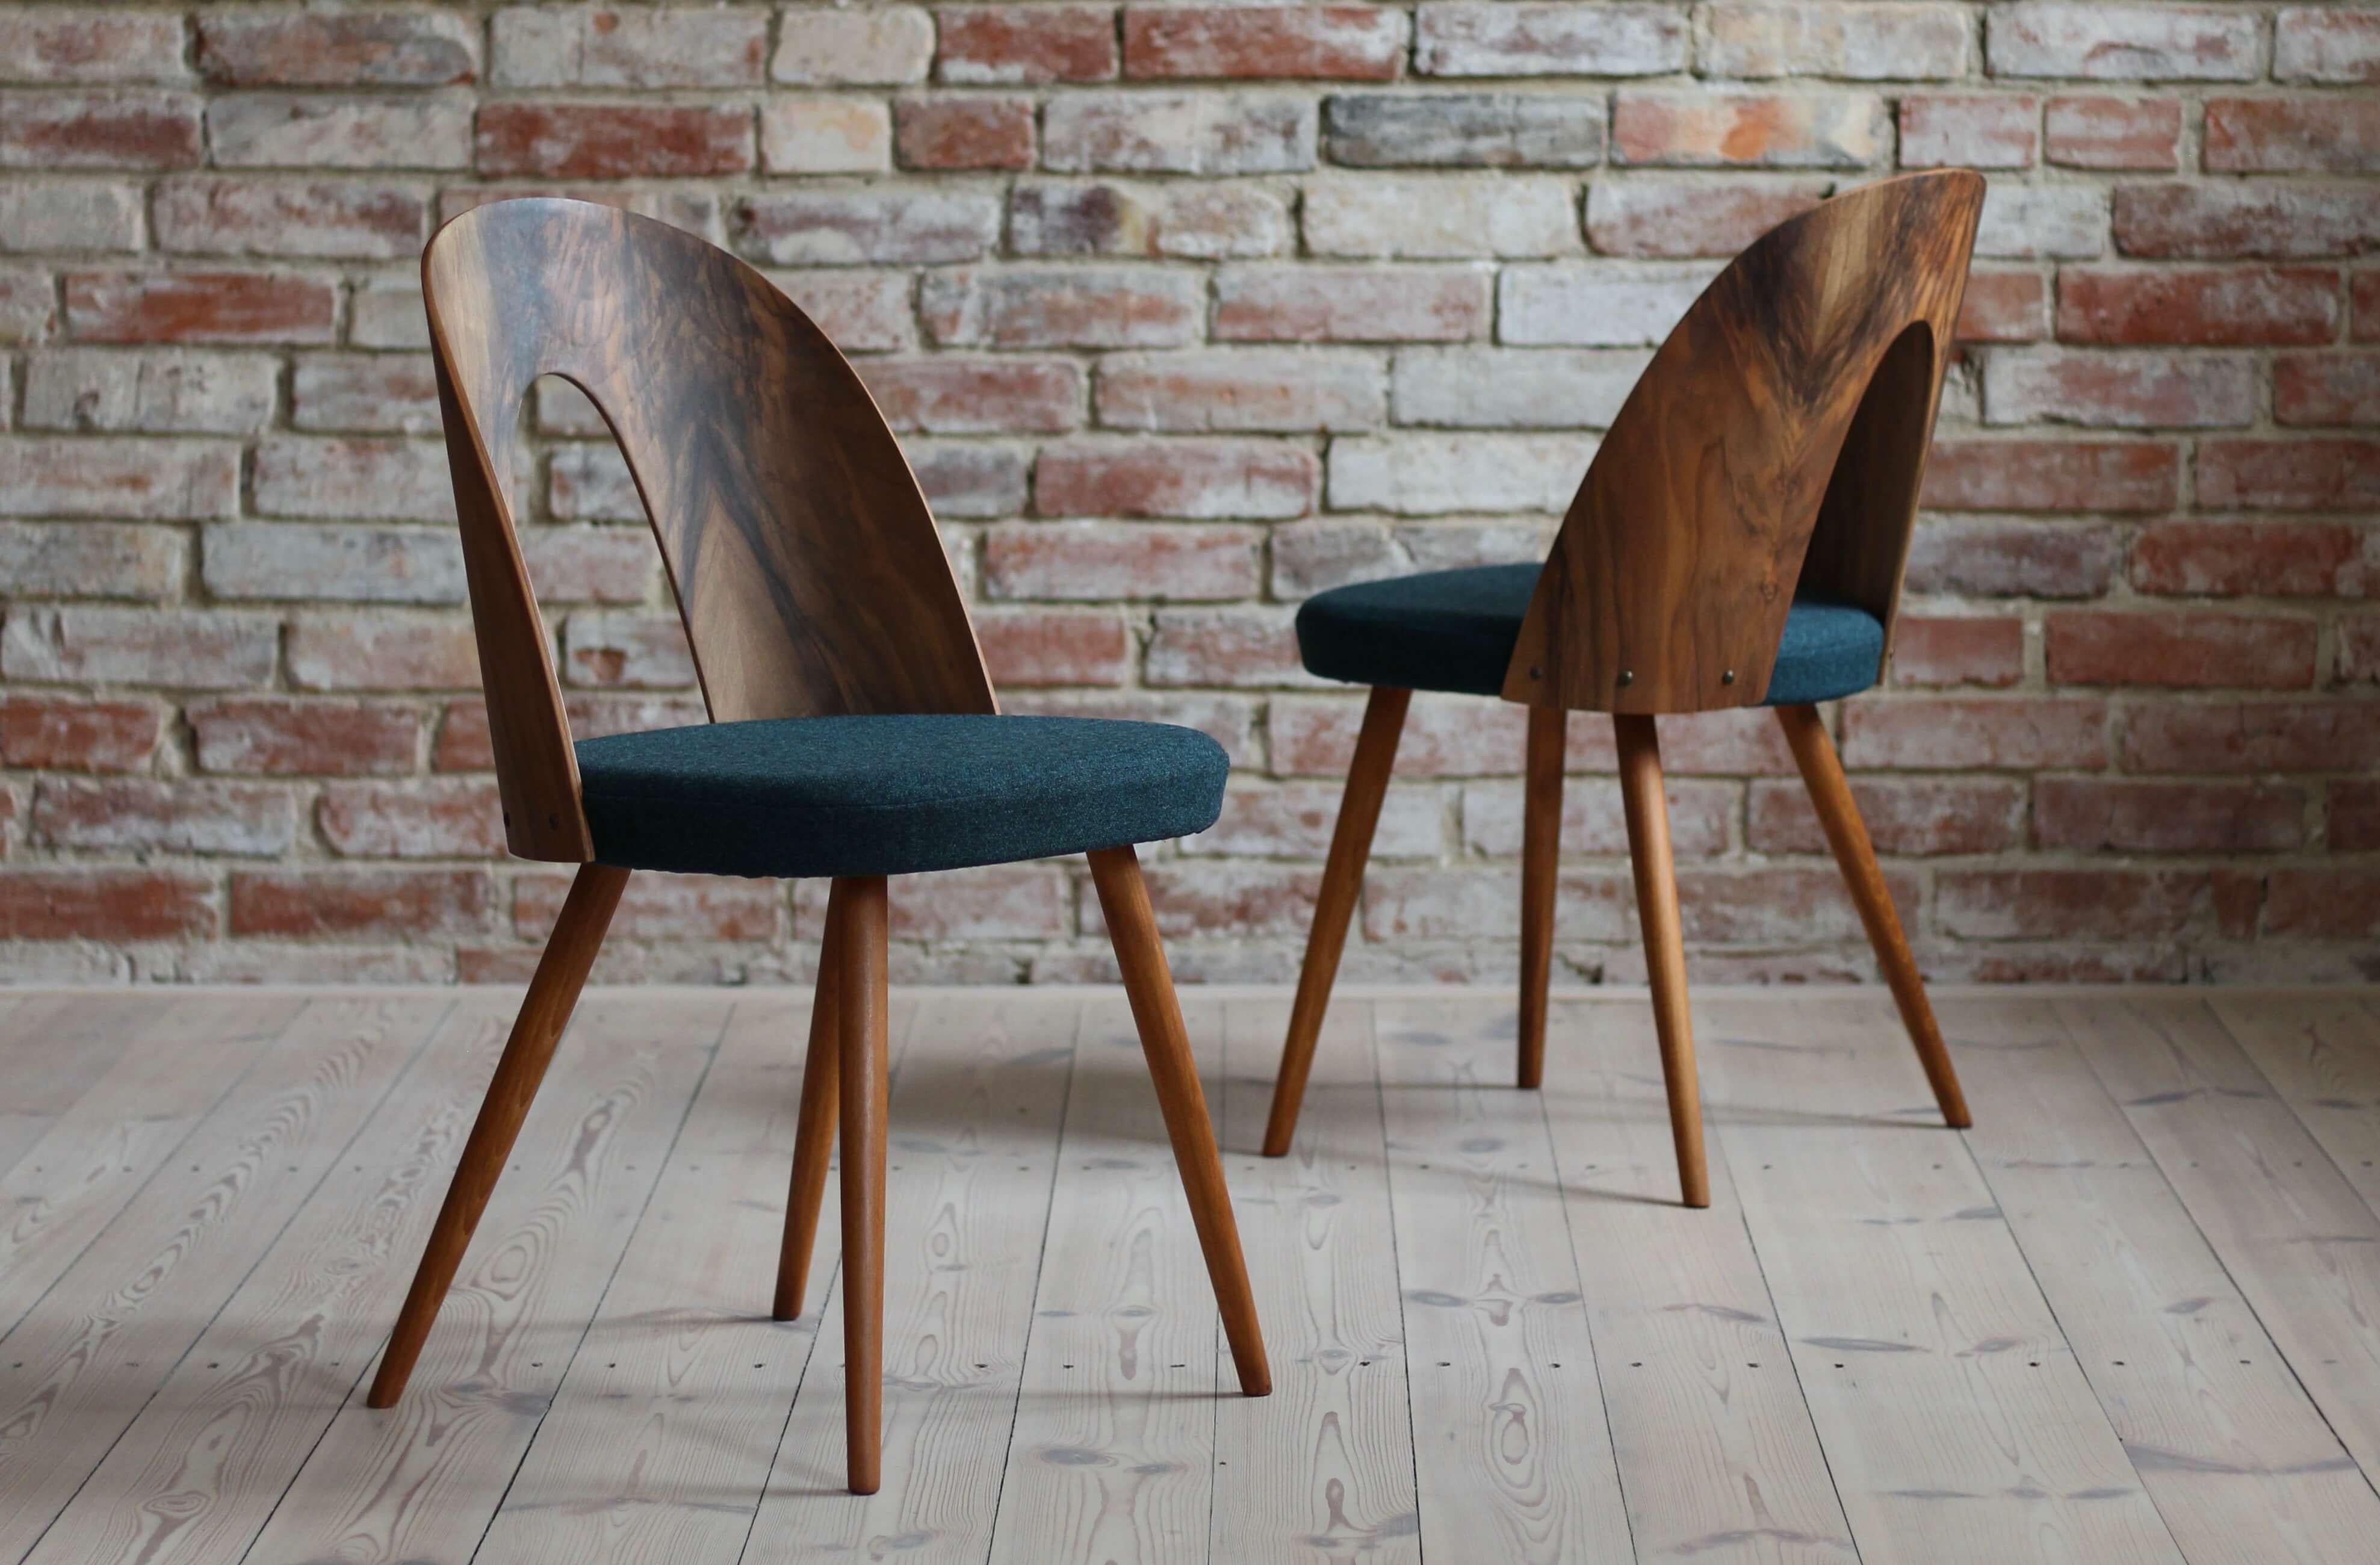 Set of 4 Midcentury Walnut Dining Chairs by A. Šuman, KVADRAT Reupholstery In Good Condition In Wrocław, Poland